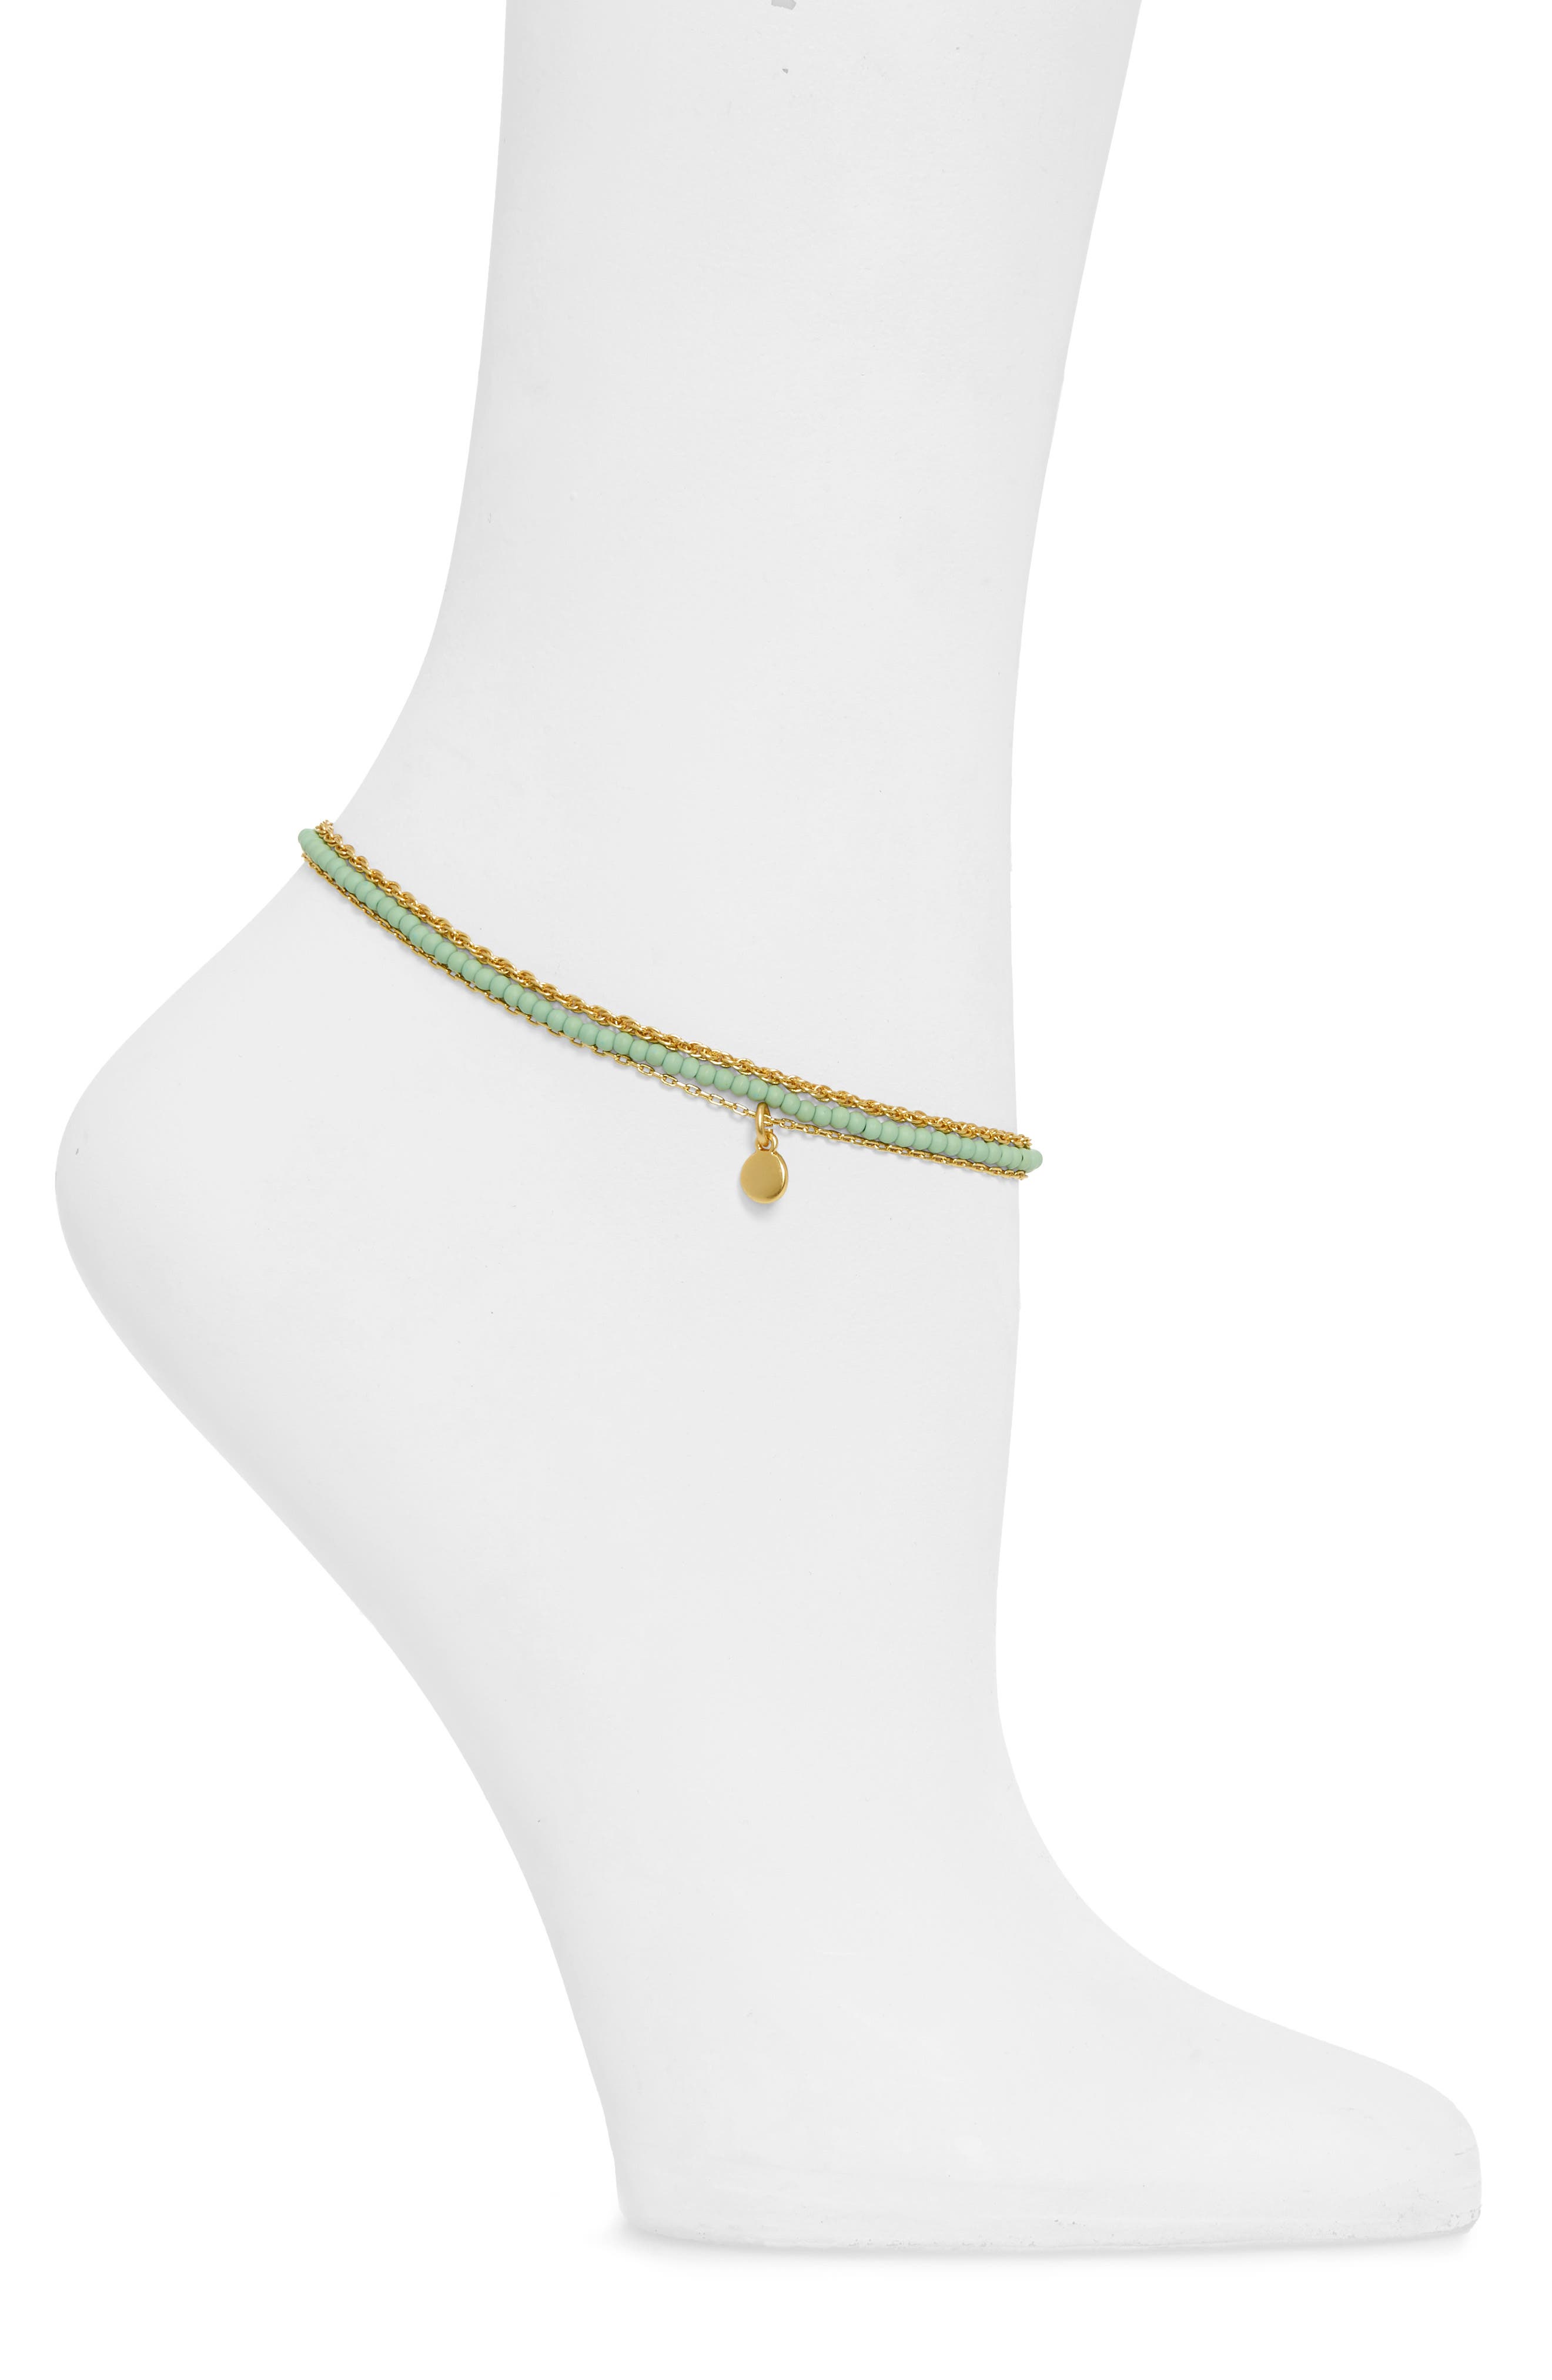 Madewell 3-Pack Surfside Anklet Set in Heather Peacock